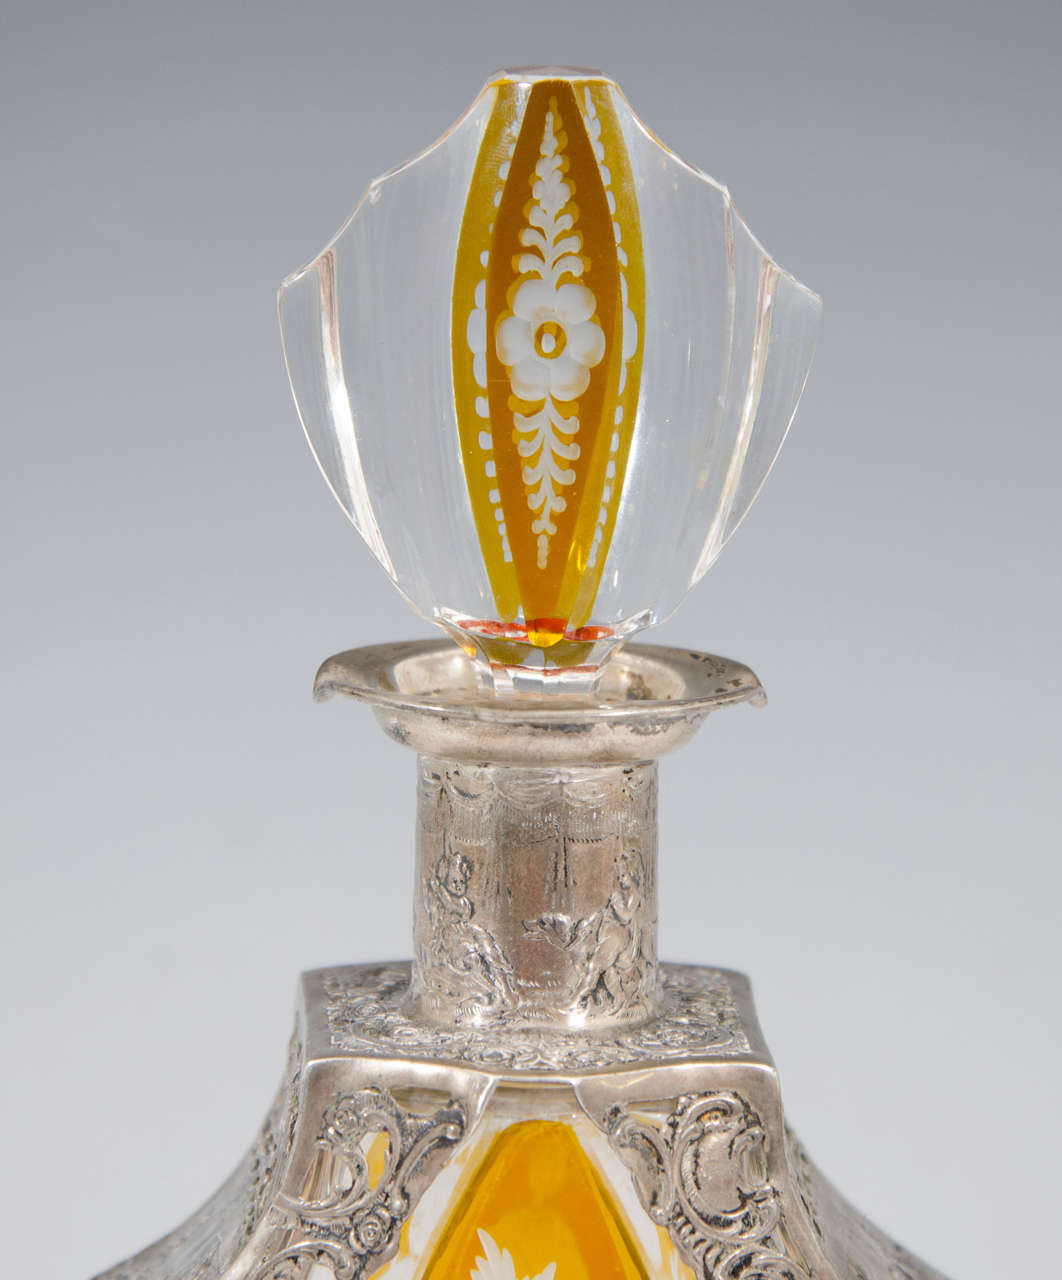 European A Vintage Crystal and Amber Color Decanter with Silver Overlay